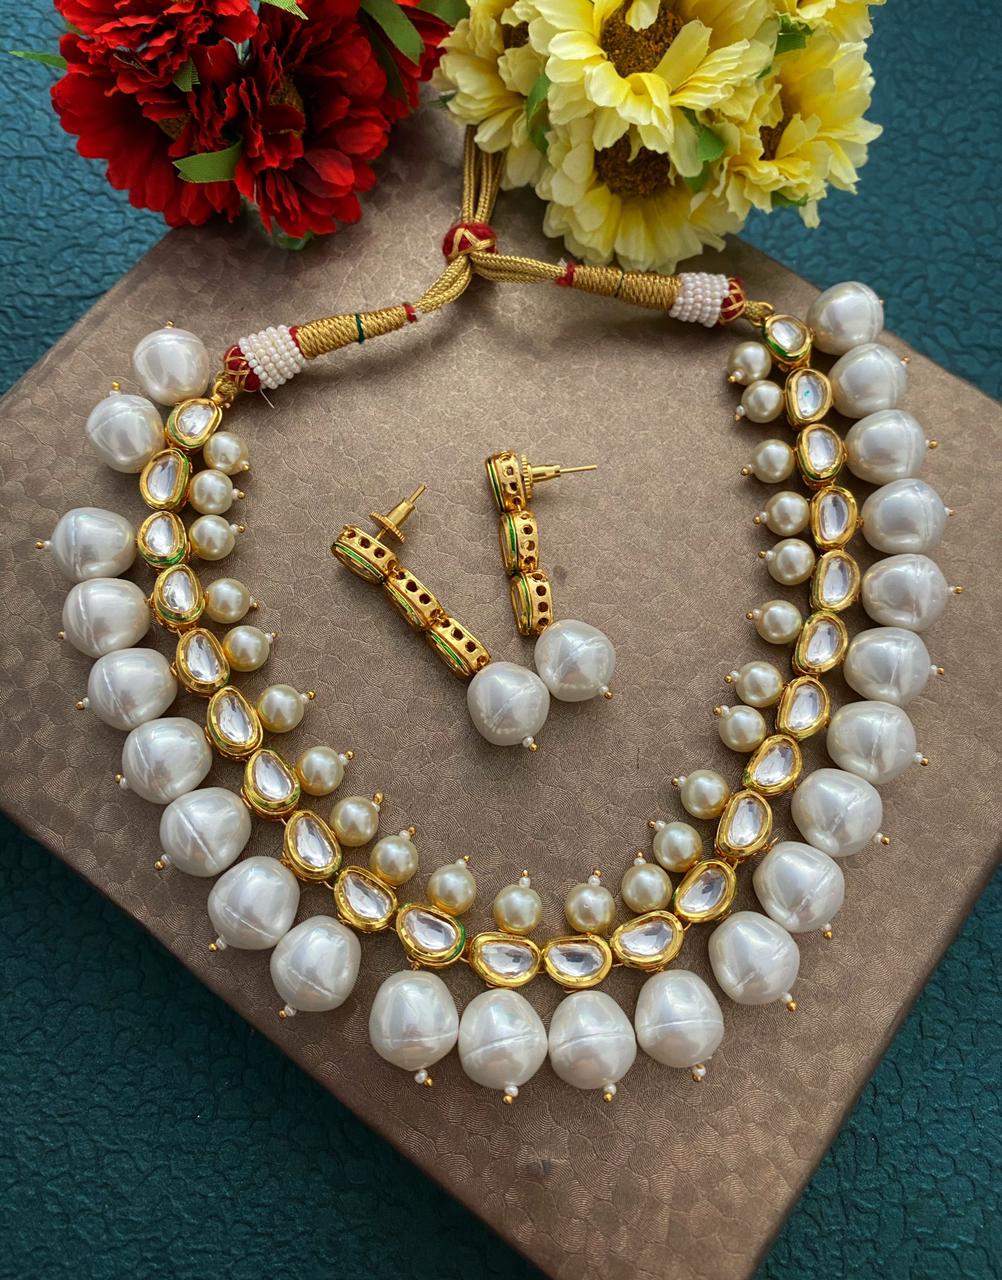 Traditional Gold Plated Kundan Necklace Set With Pearls For Ladies By Gehna Shop Kundan Necklace Sets